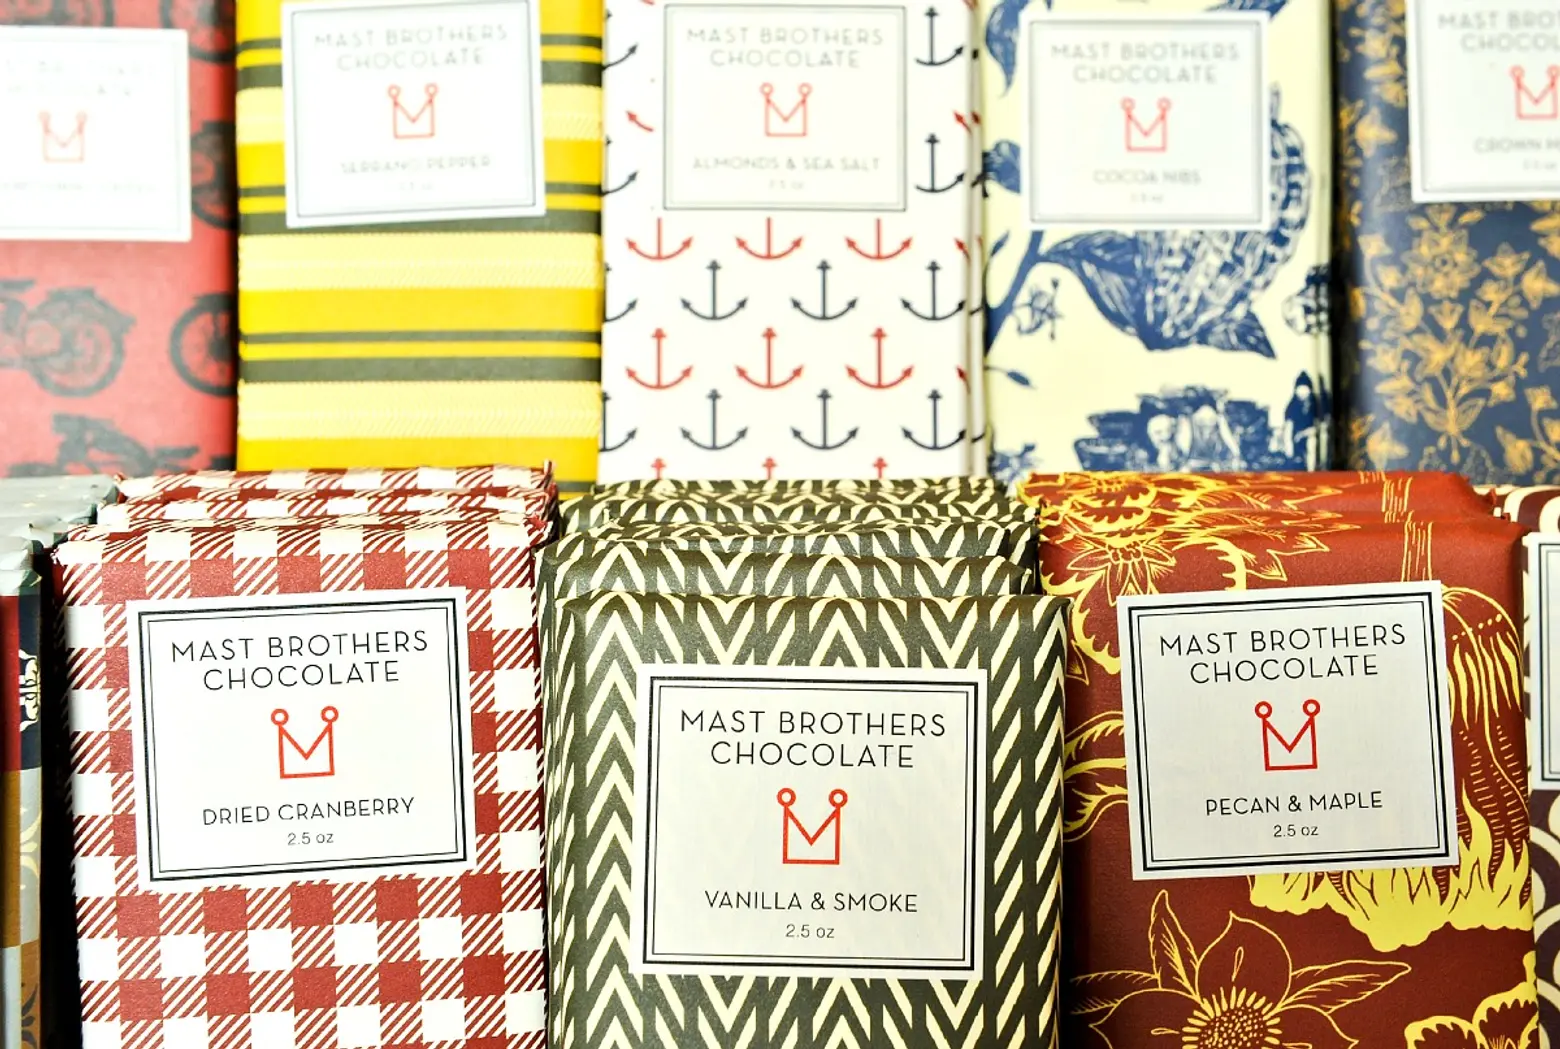 Did Mast Brothers Fool Us Into Buying Crappy Chocolate?; ‘The 12 Days of Christmas’ Monetized